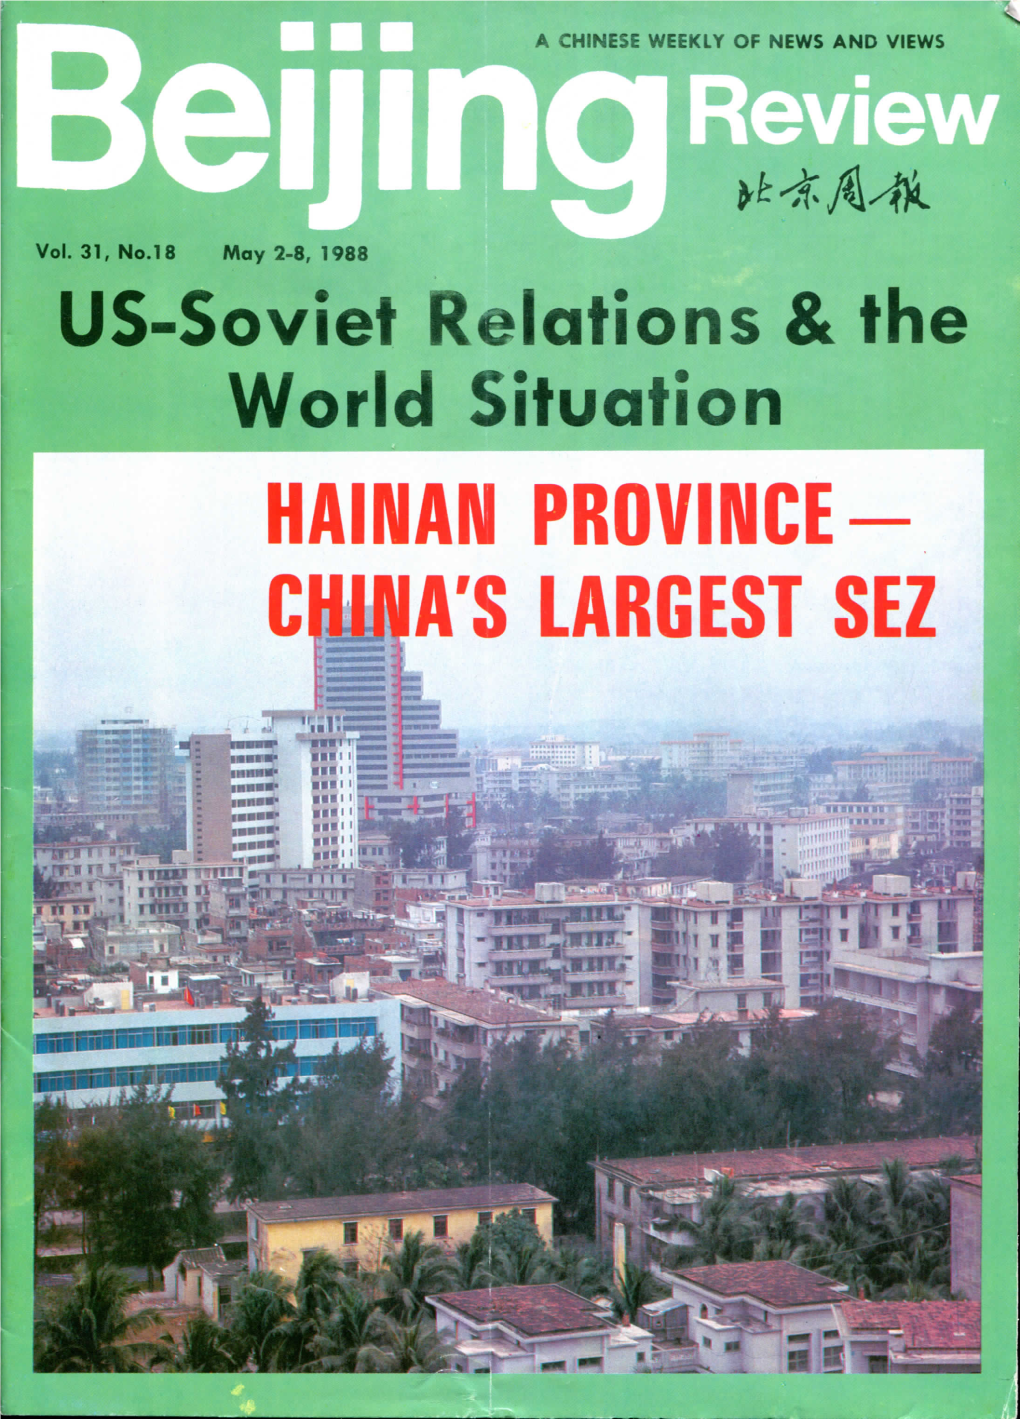 US-Soviet Relations & the World Situation HAINAN